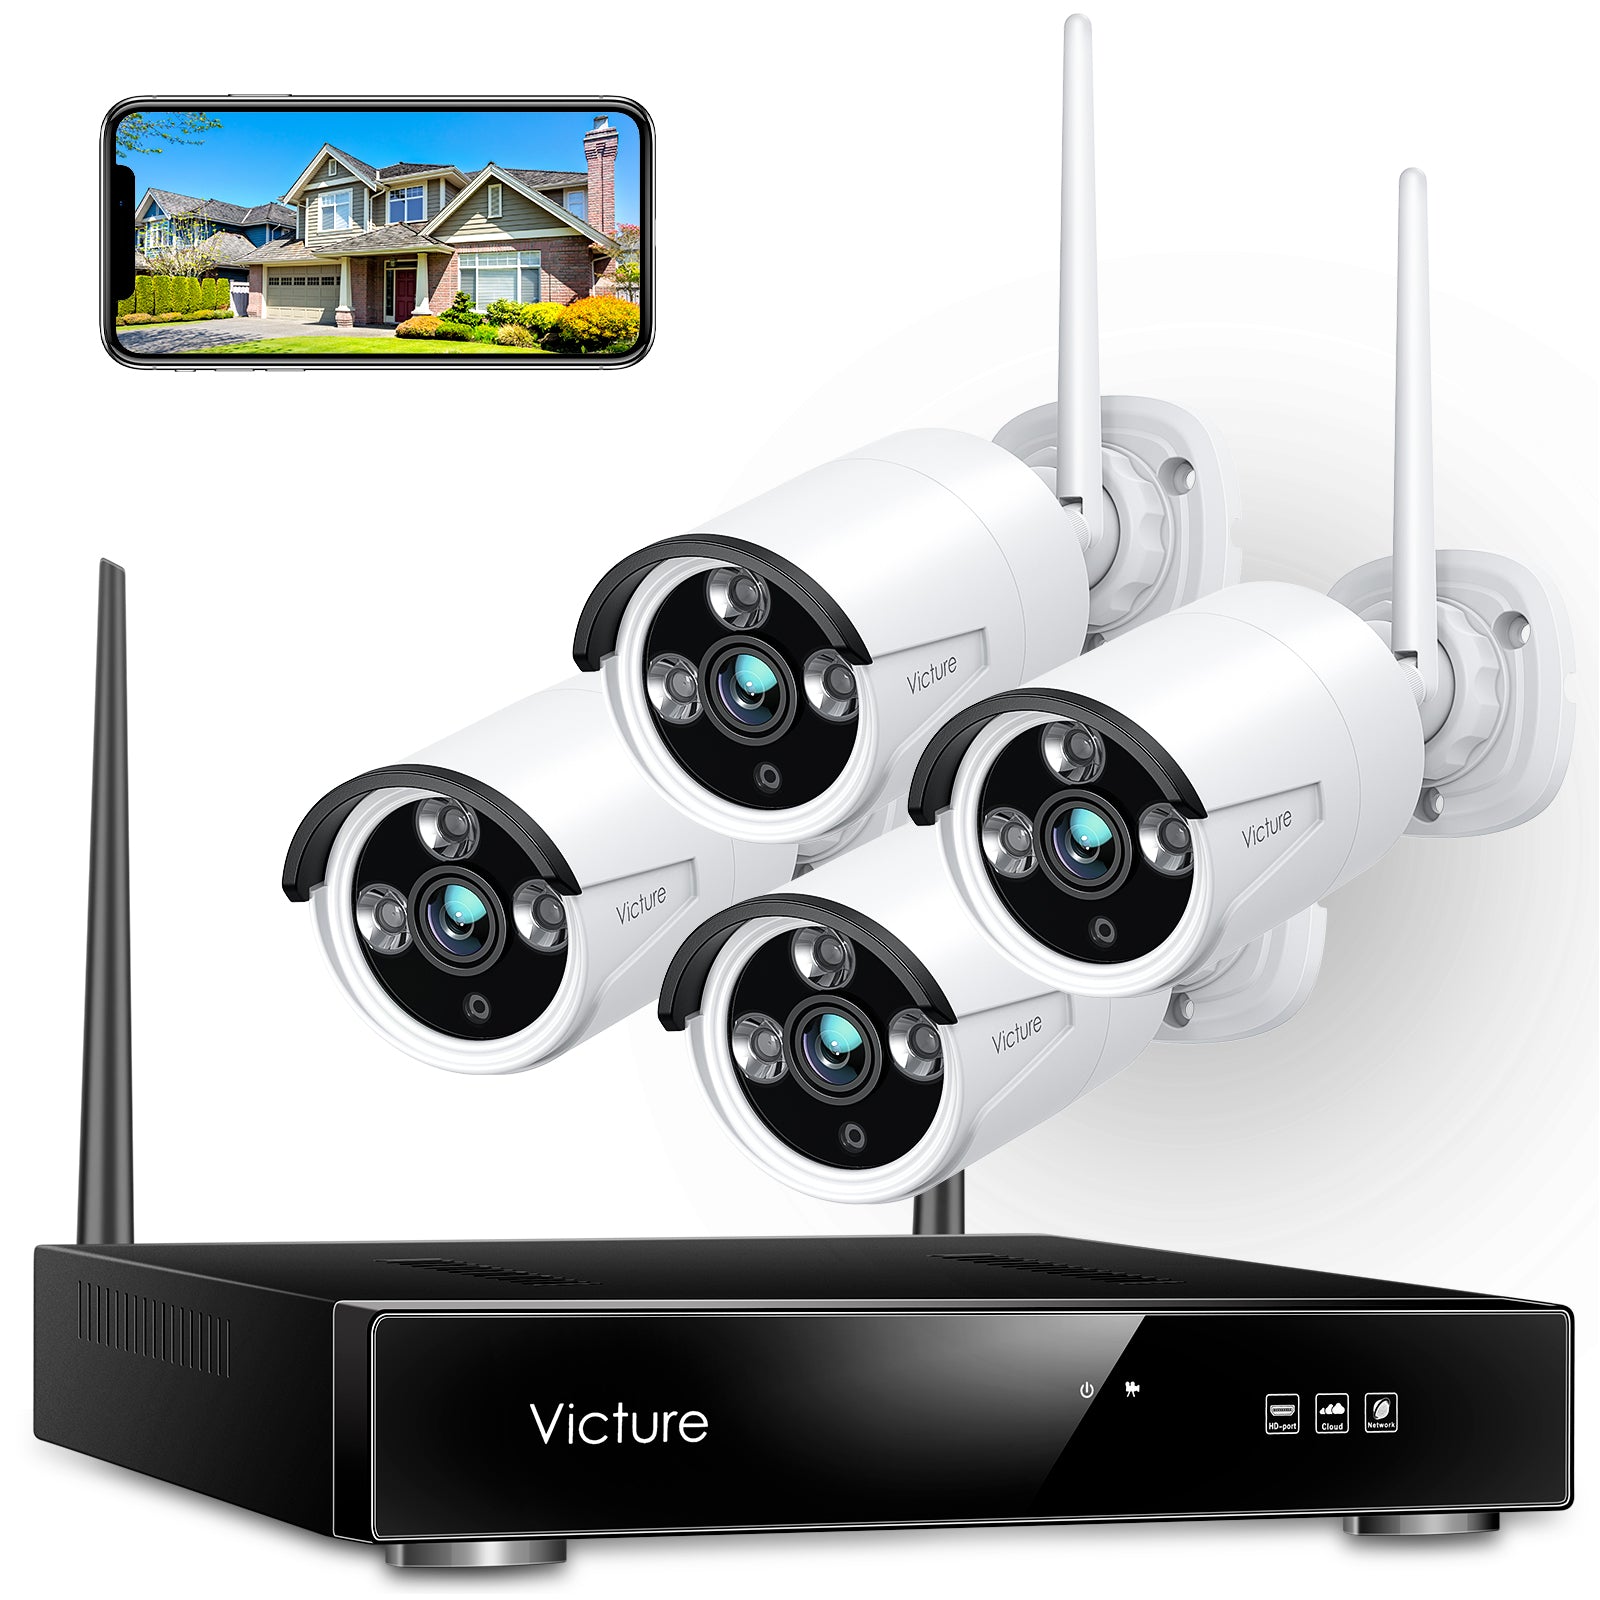 Victure NK200 Security Camera